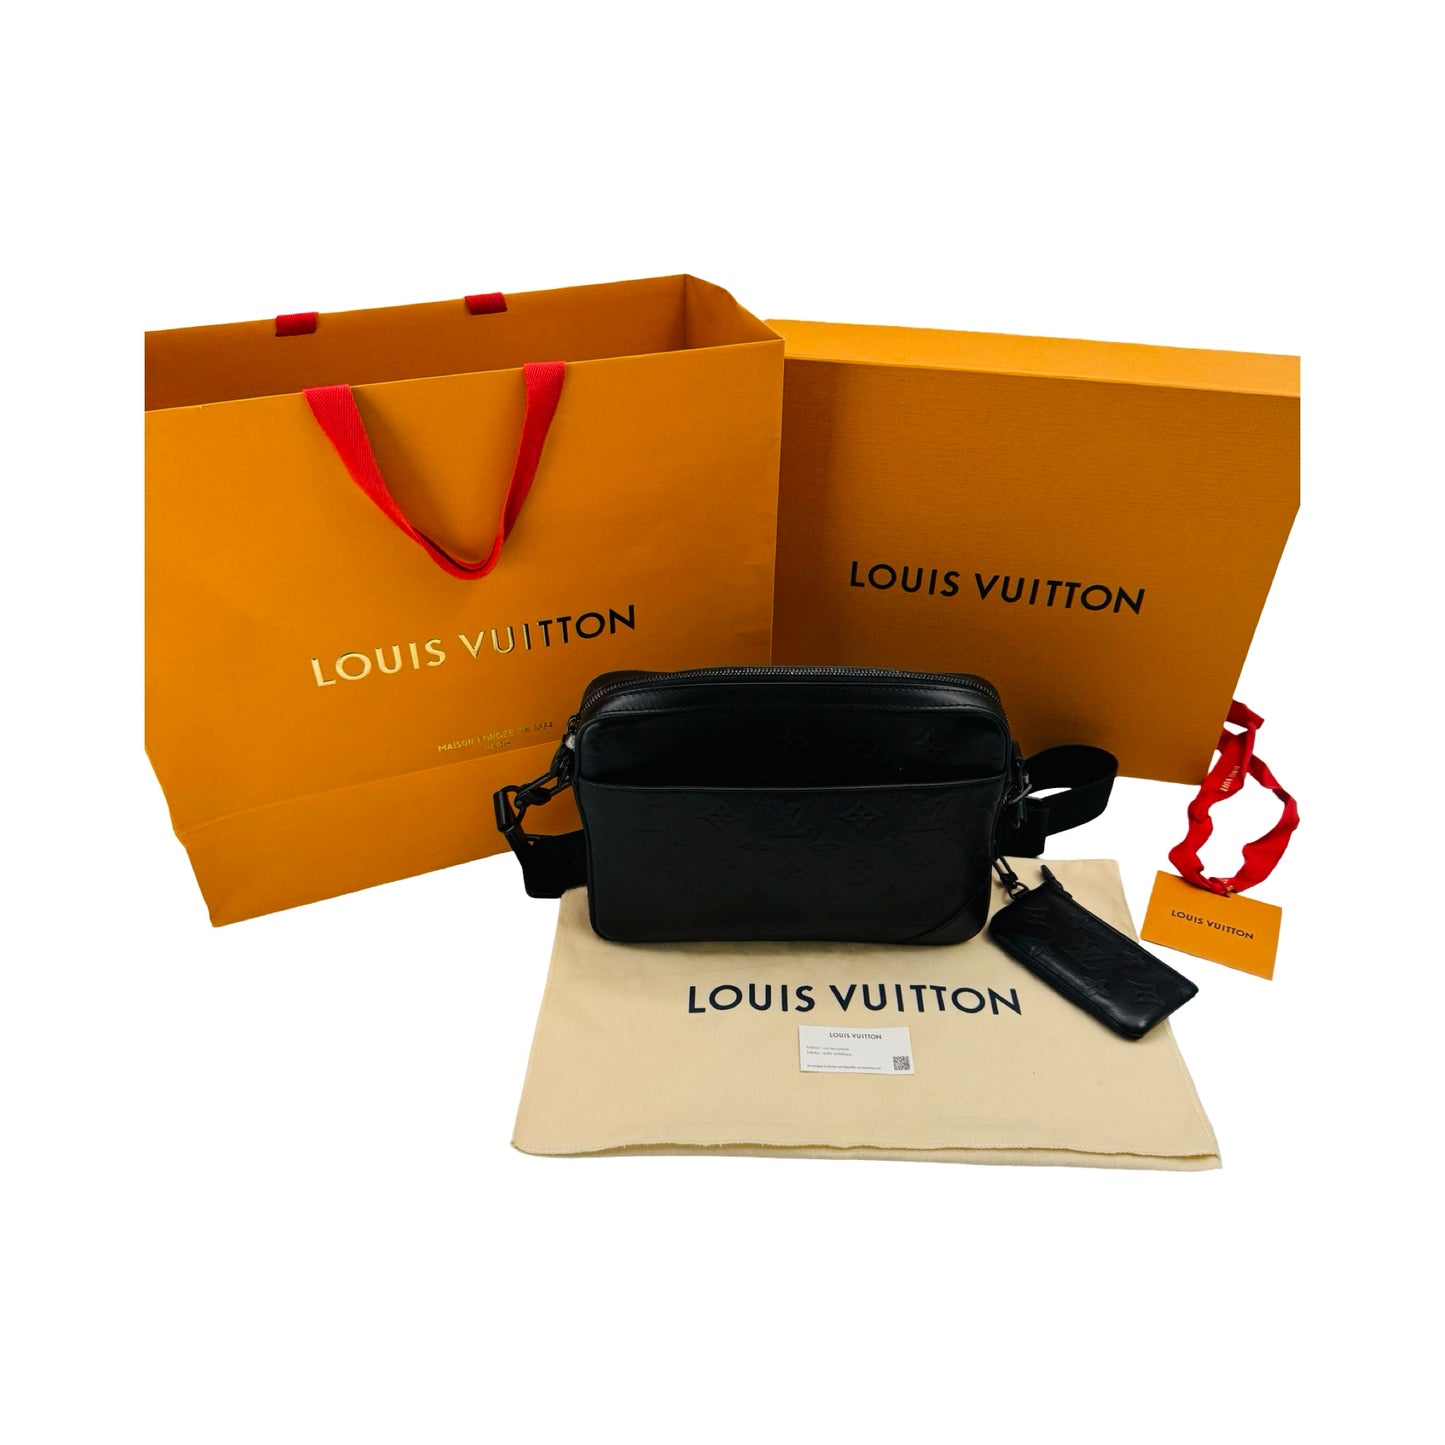 Duo Messenger Noir-Imprinted Monogram Shadow Leather with Removable Adjustable Strap Black Crossbody Luxury Designer By Louis Vuitton  Size: Small